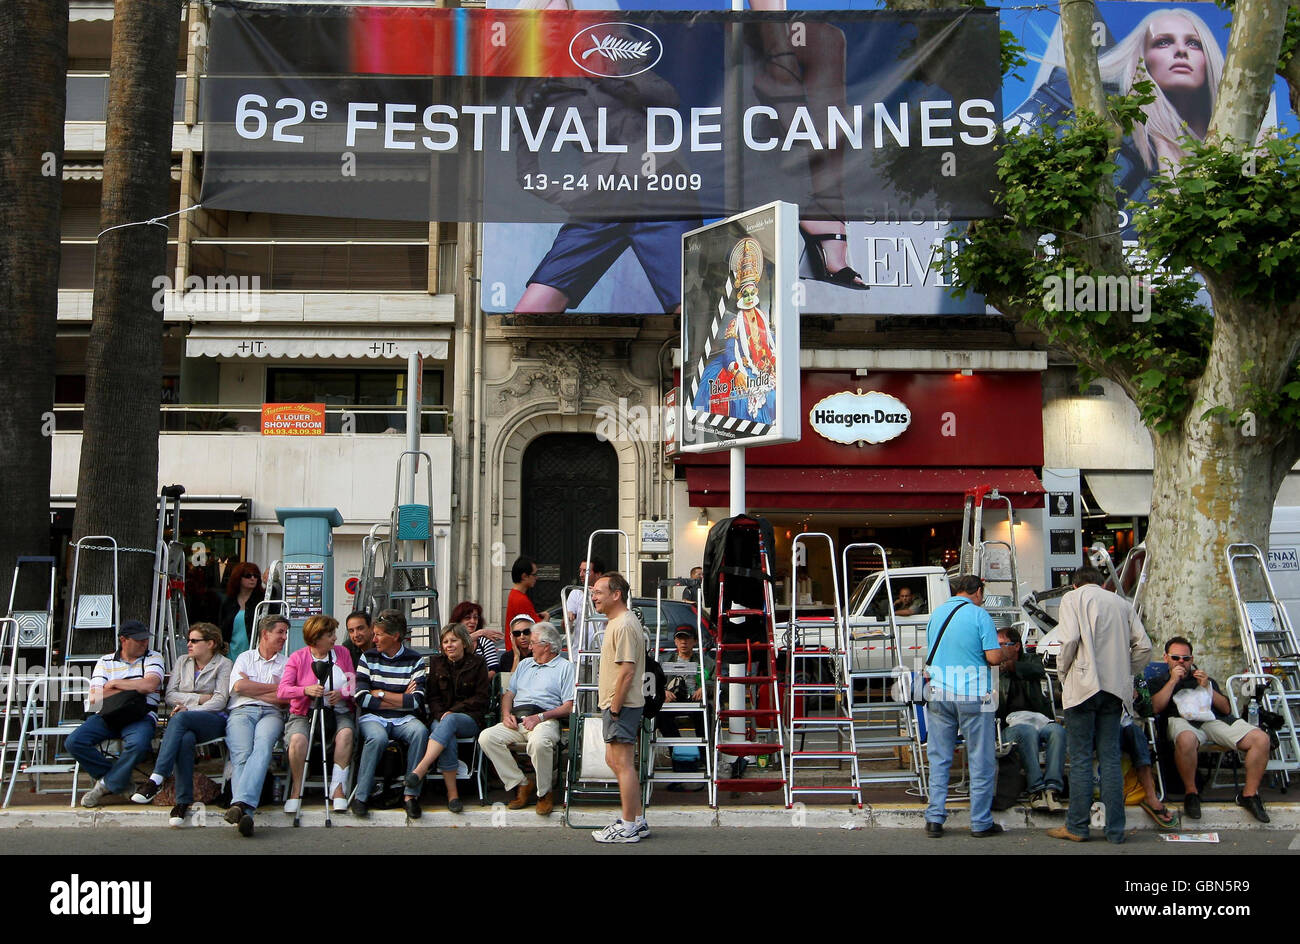 Fans with stepladders gather opposite the Palais des Festivals, in Cannes, France, ahead of the start of the Festival de Cannes, which starts tomorrow. Stock Photo